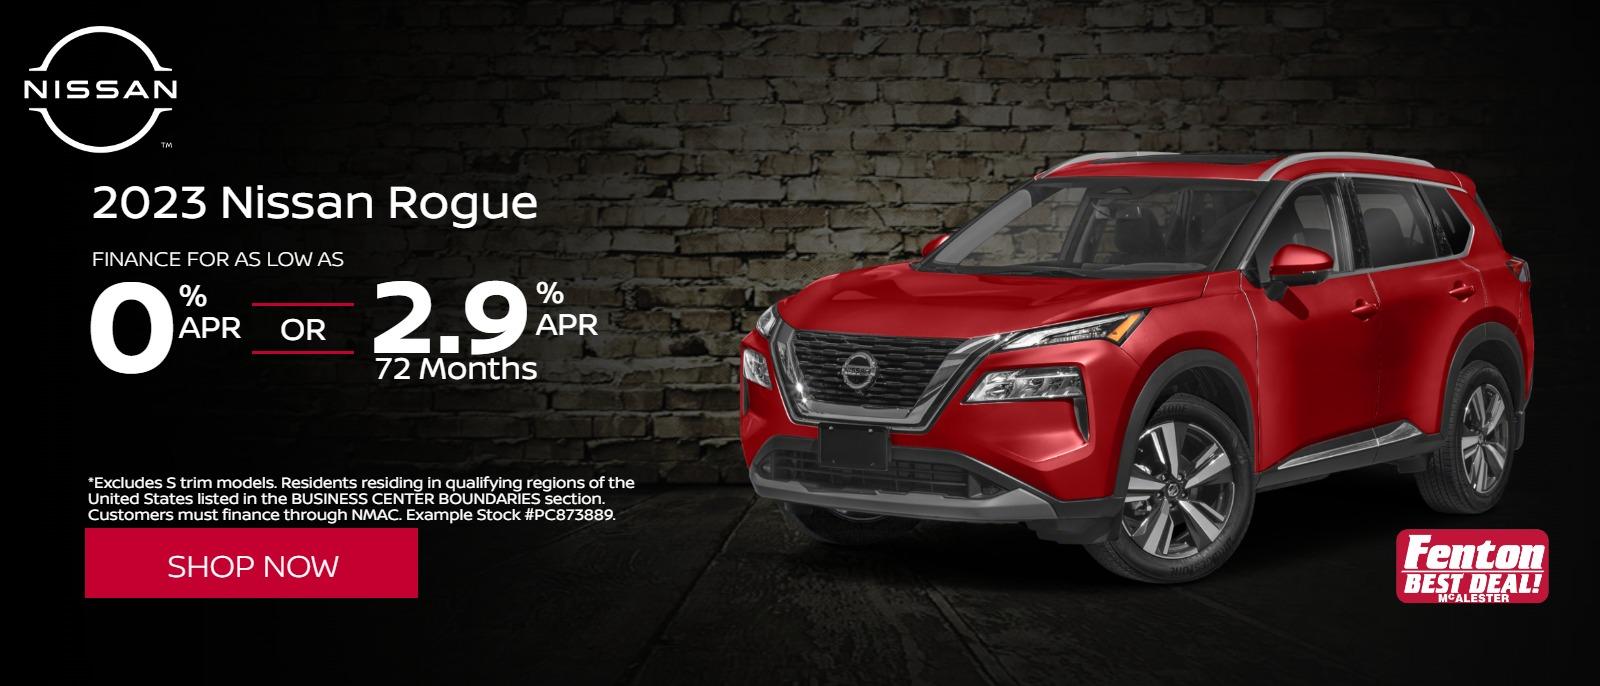 0% | or | 2.9% APR Financing available on 2023 Nissan Rogue
*Residents residing in qualifying regions of the United States listed in the BUSINESS CENTER BOUNDARIES section. Customers must finance through NMAC